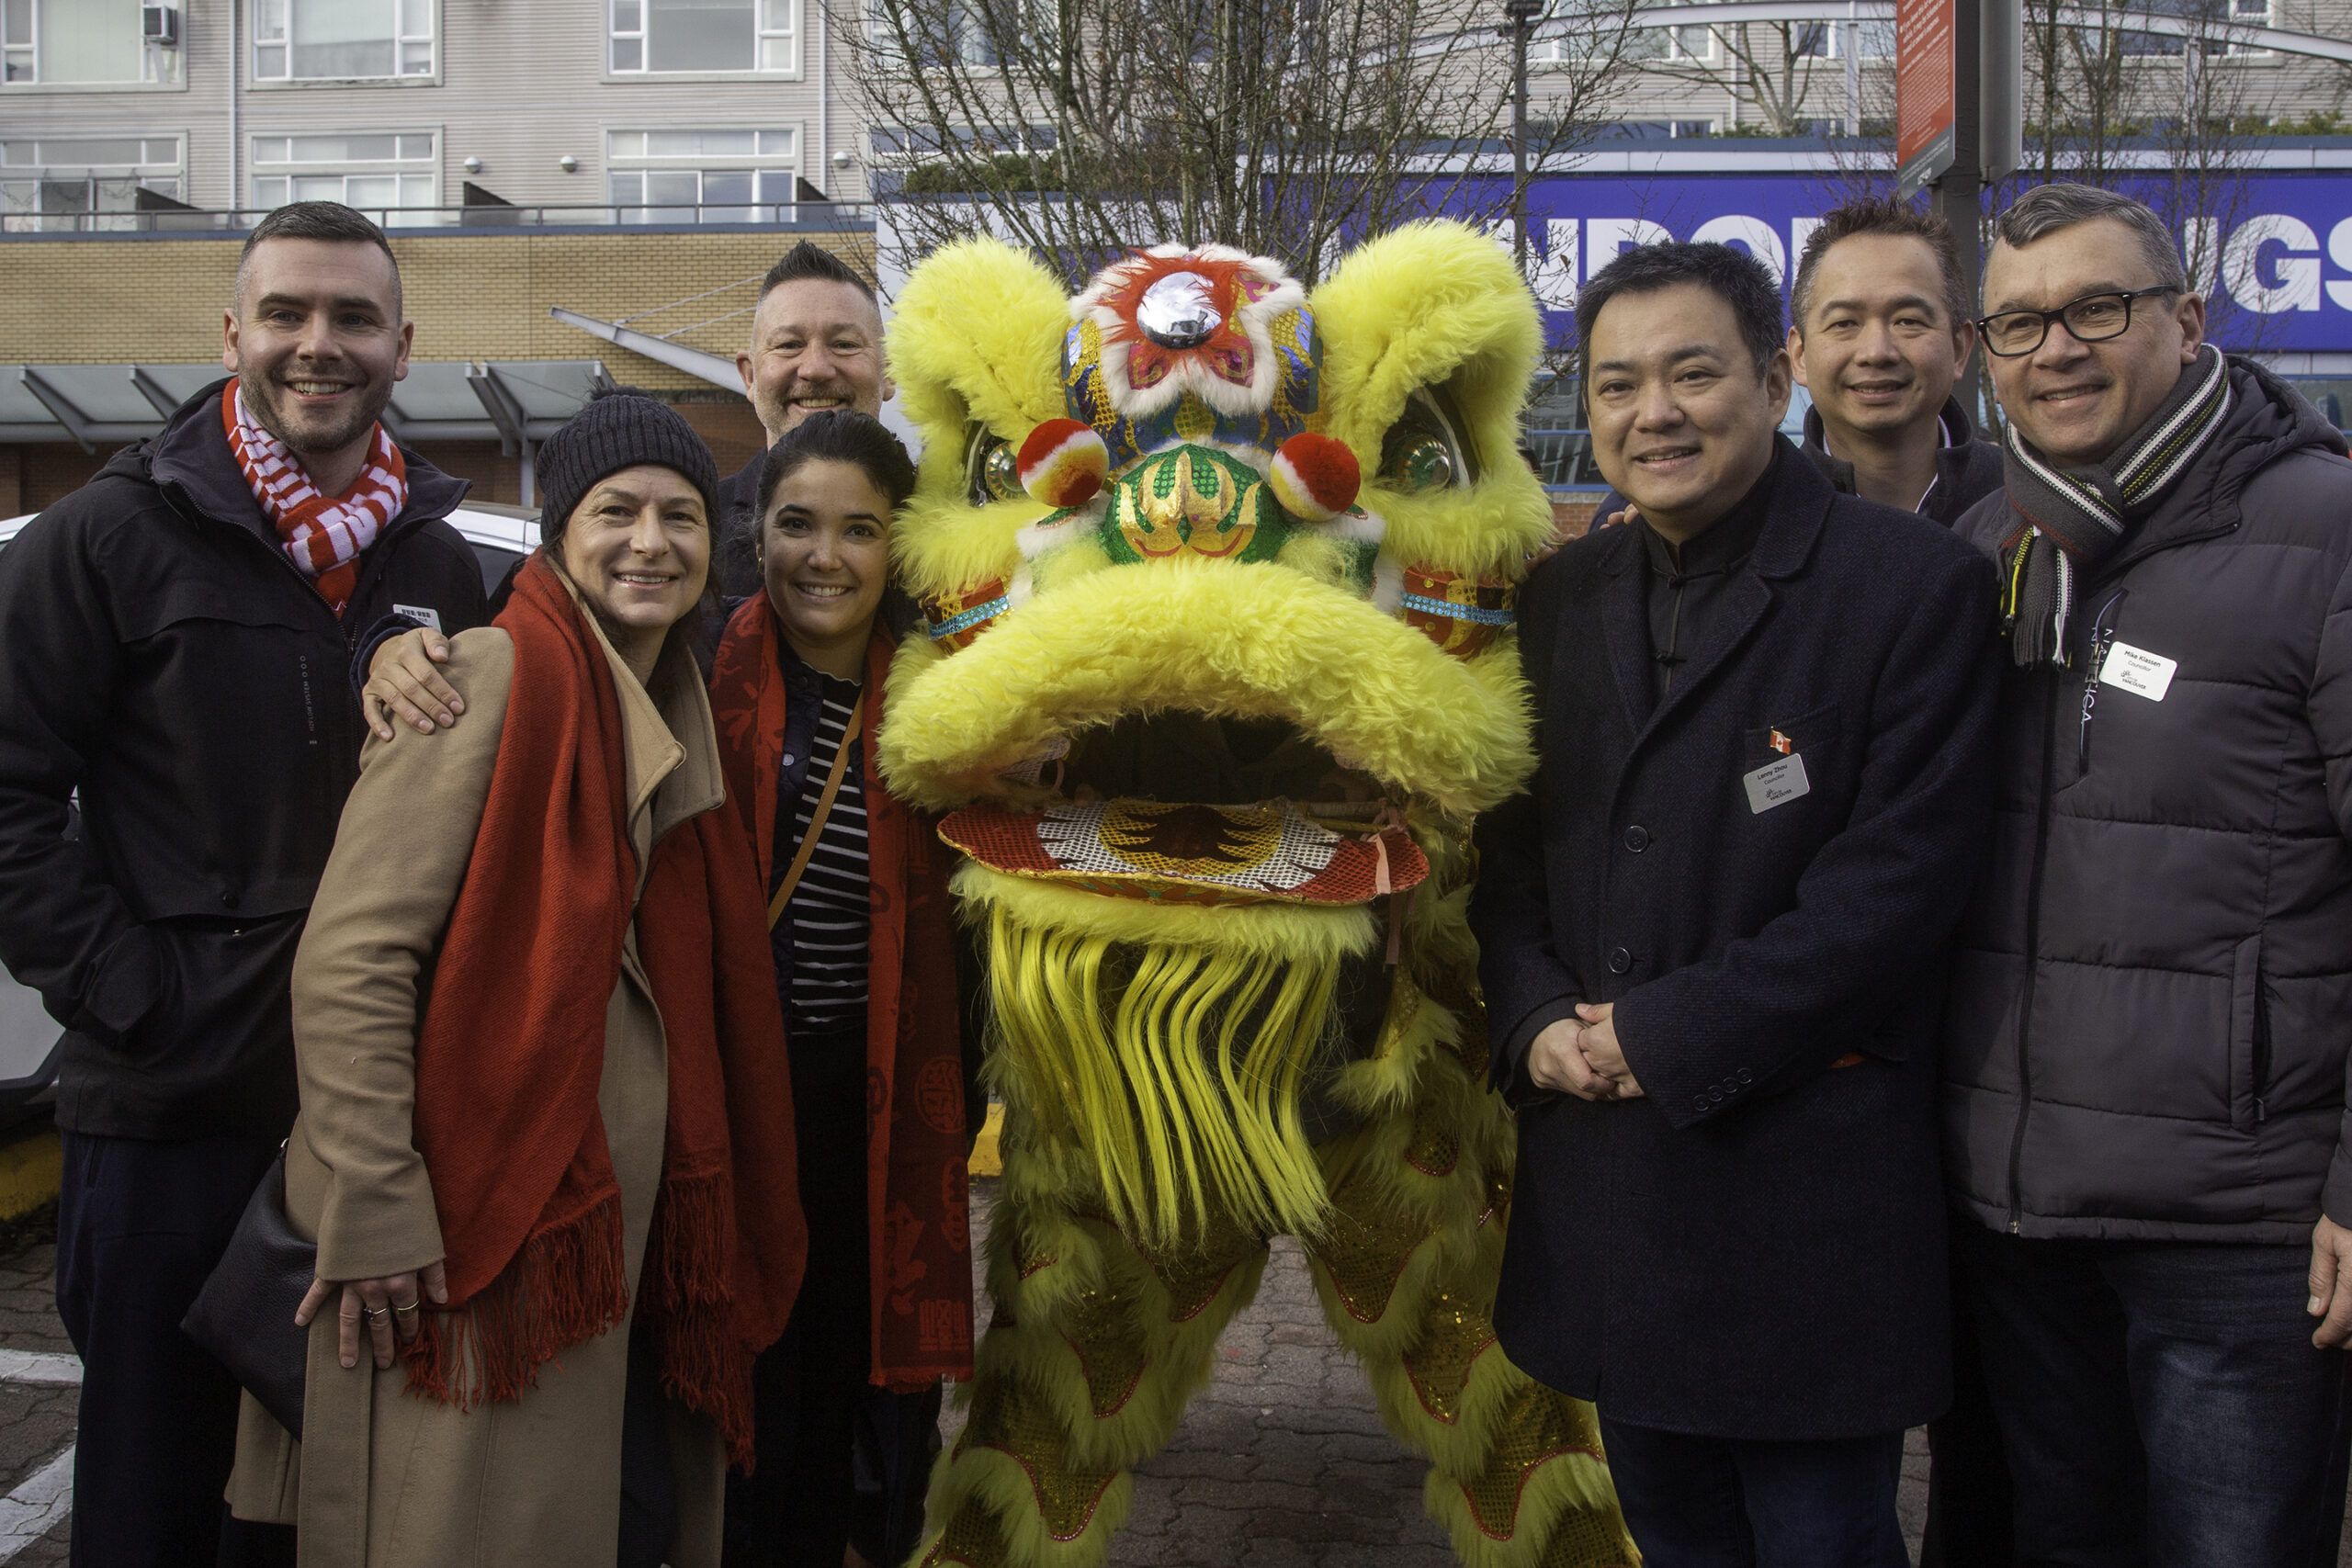 2023-lunar-new-year-celebrations-on-victoria-drive-vancouver-canada_52656089910_o